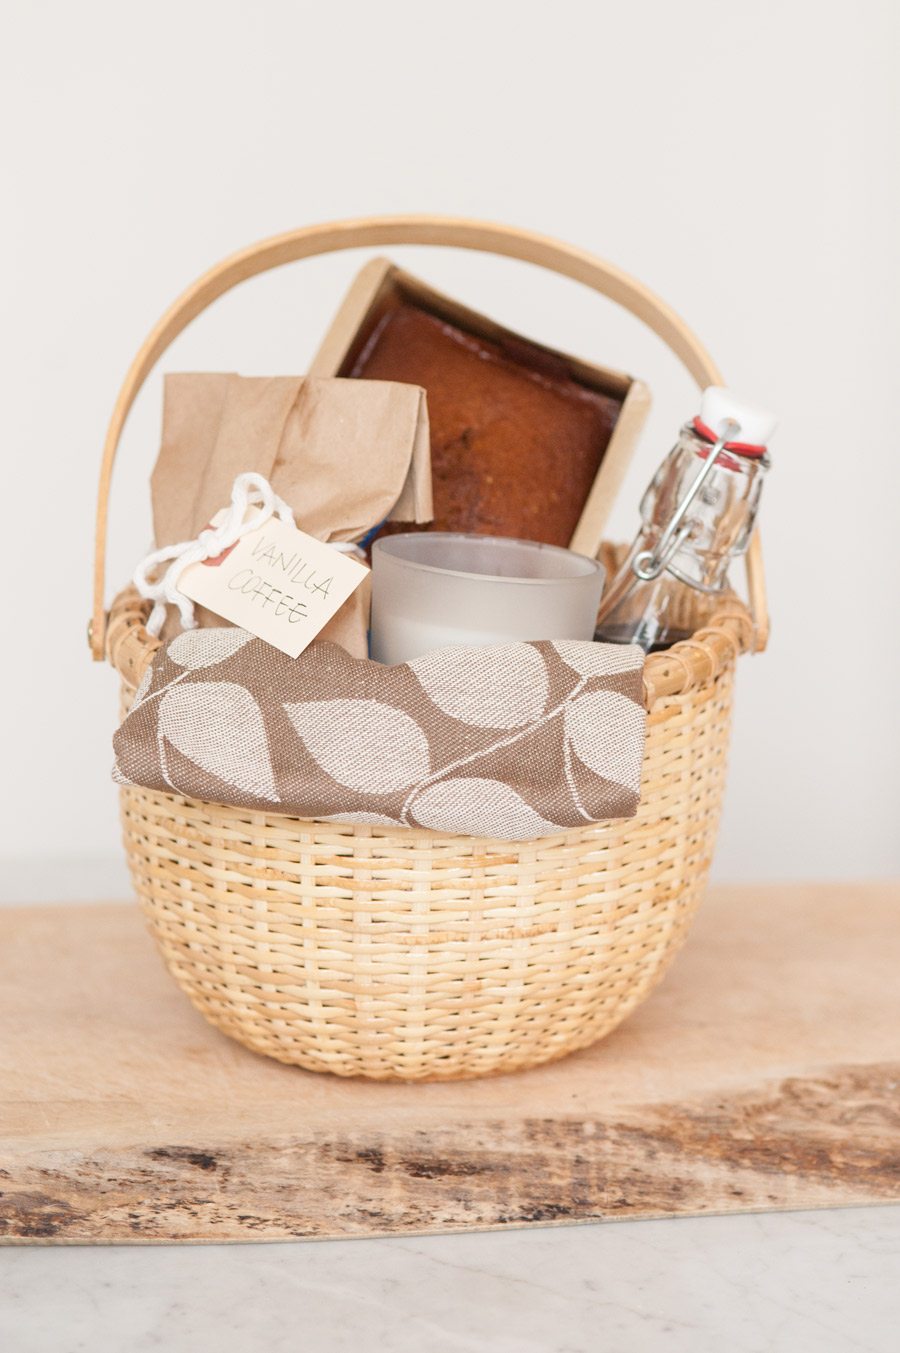 DIY Holiday Hostess Gift Basket - The Sweetest Occasion